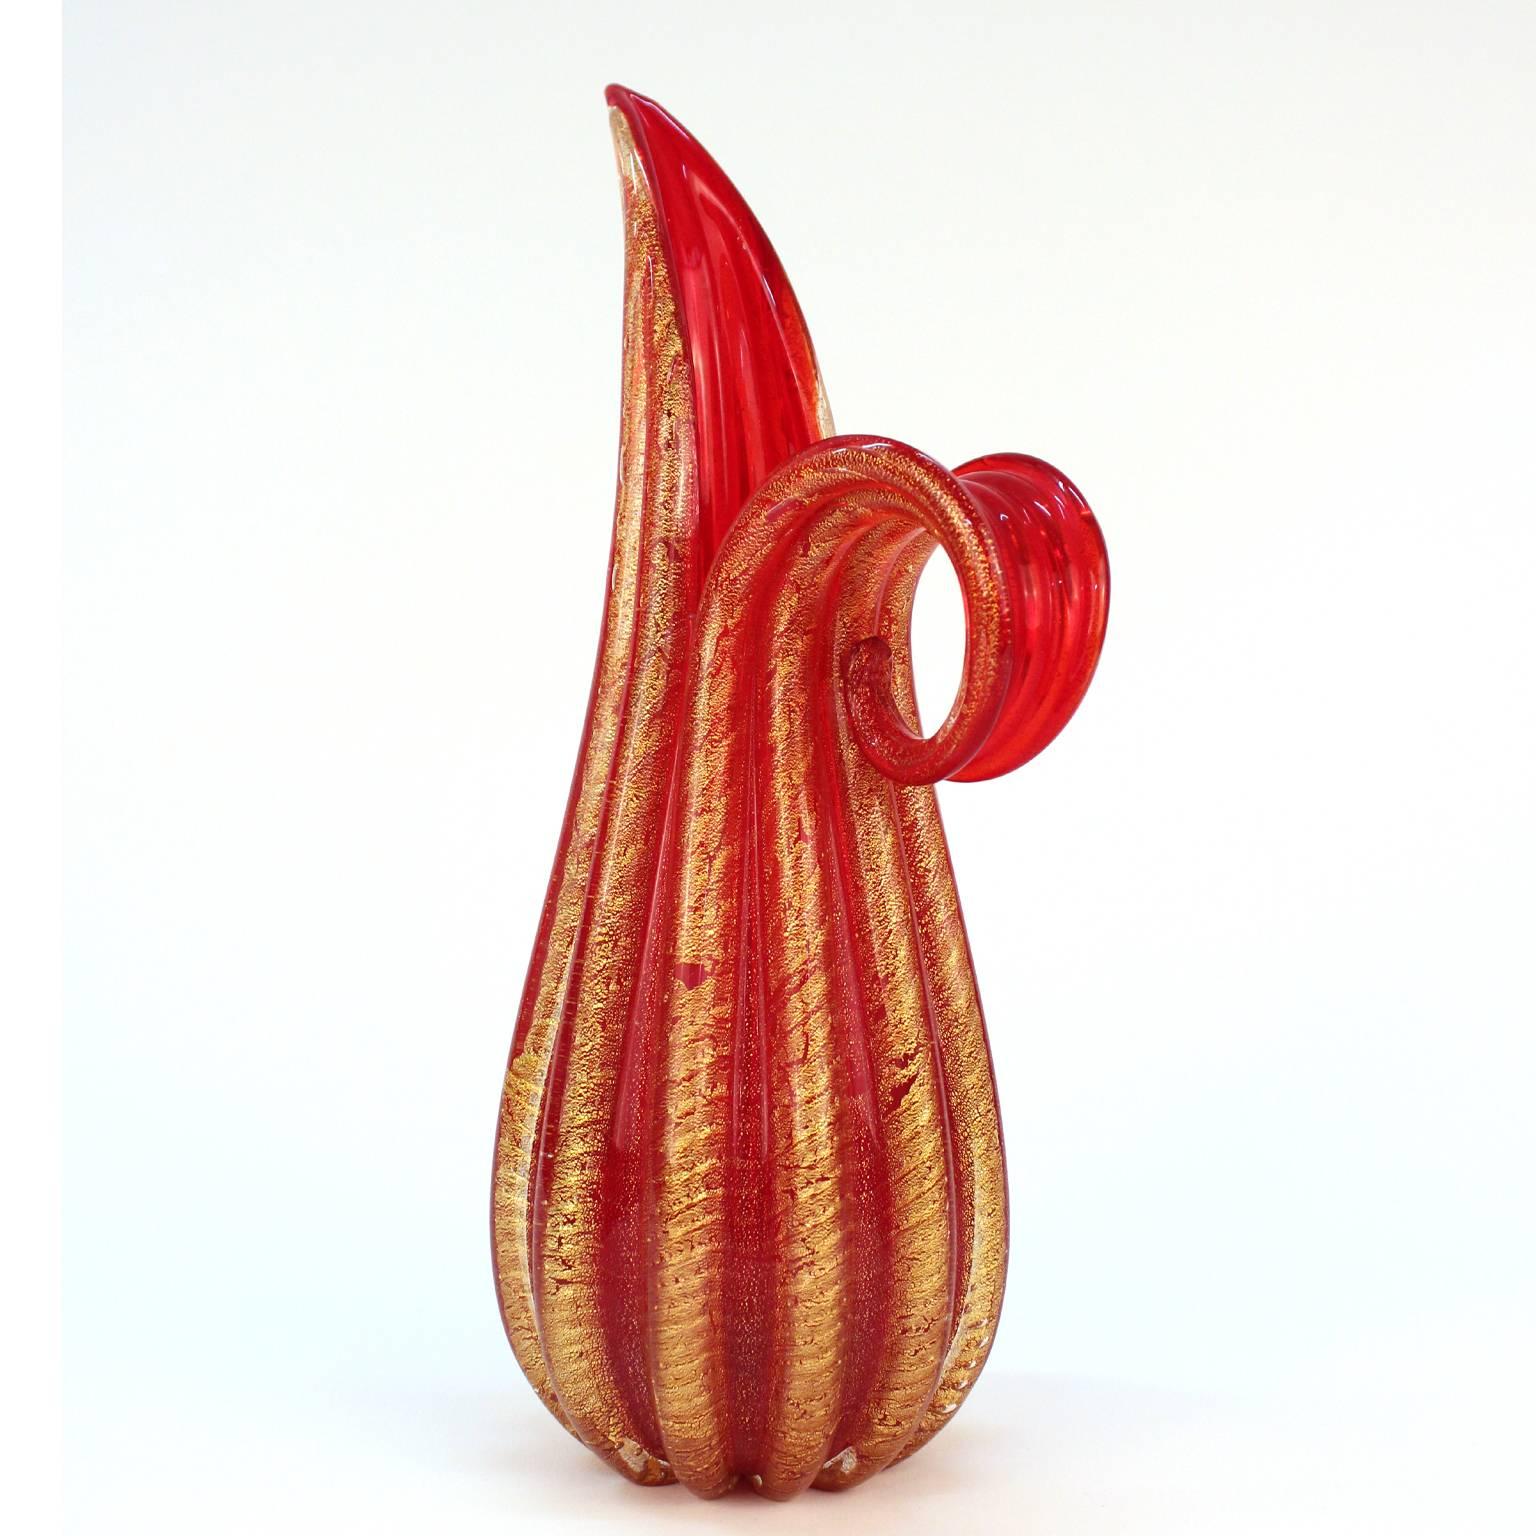 A 1930s deco Murano glass red and 24-karat gold vase made by Barovier & Toso.